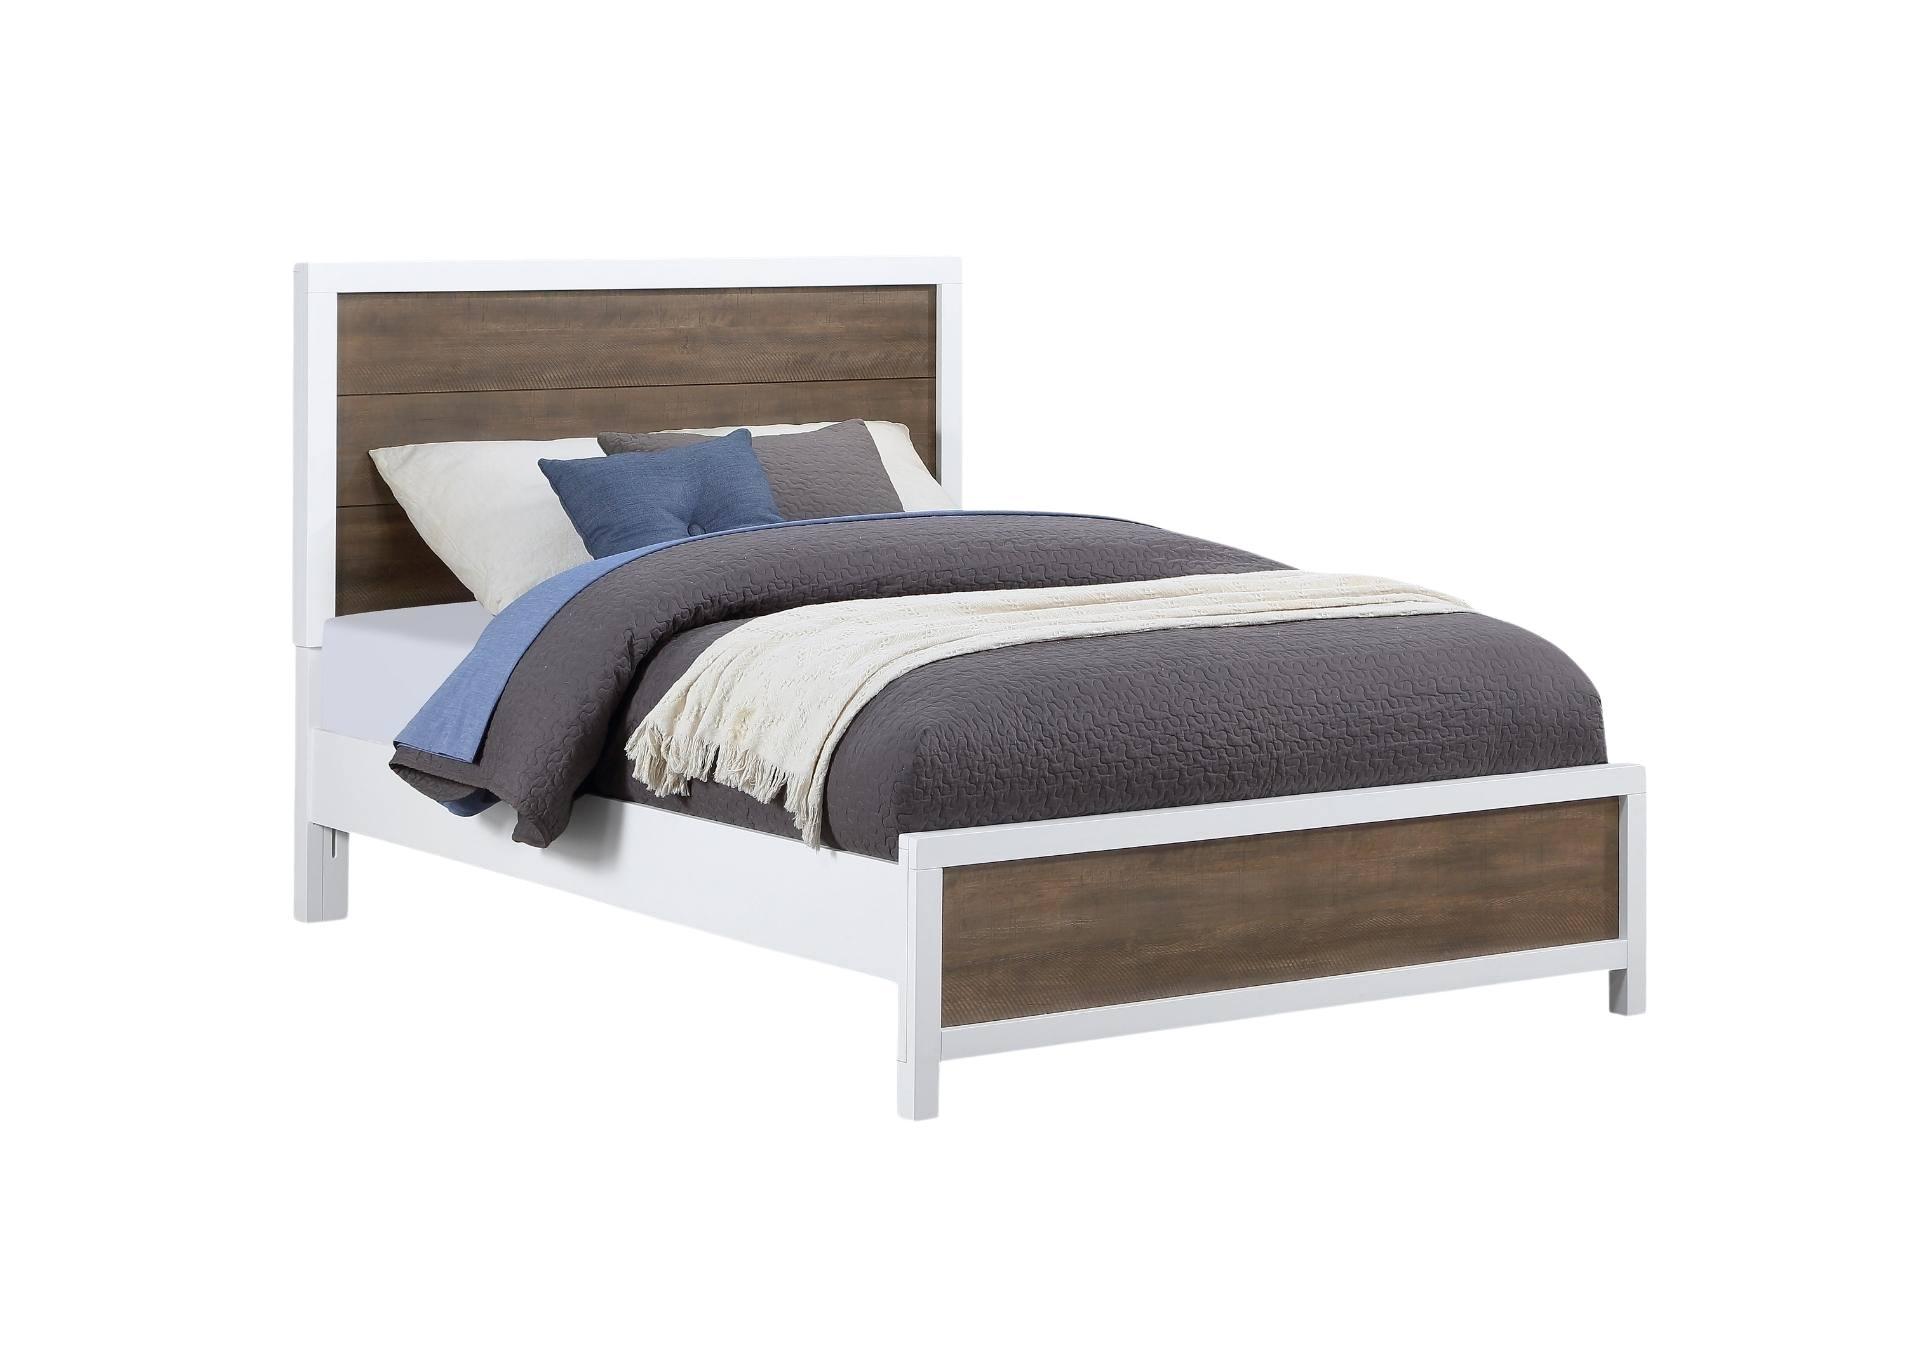 DAUGHTREY WHITE FULL PANEL BED,AUSTIN GROUP